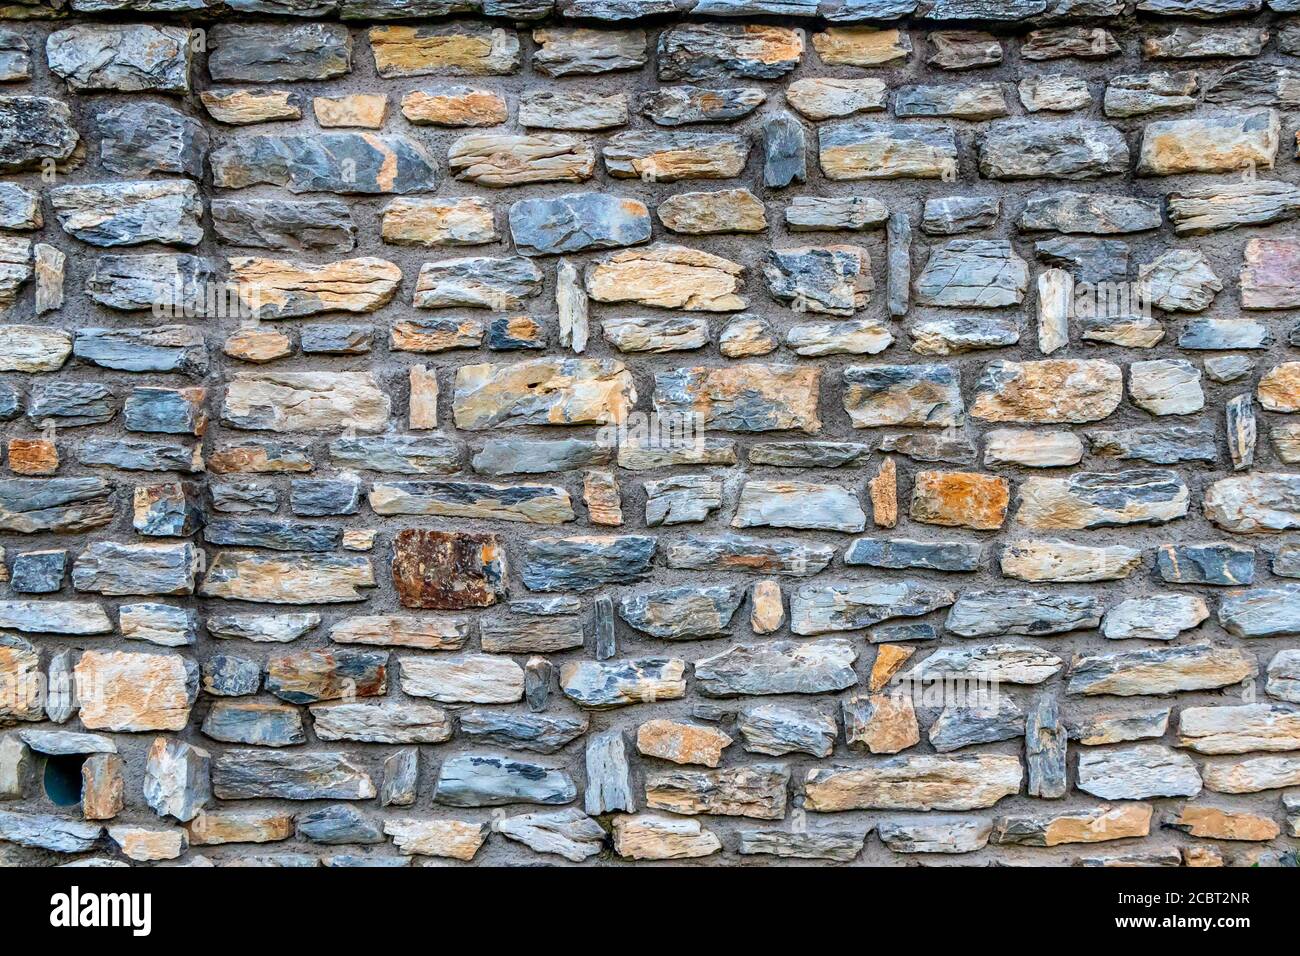 Flat picture of a stone wall made of natural rocks Stock Photo